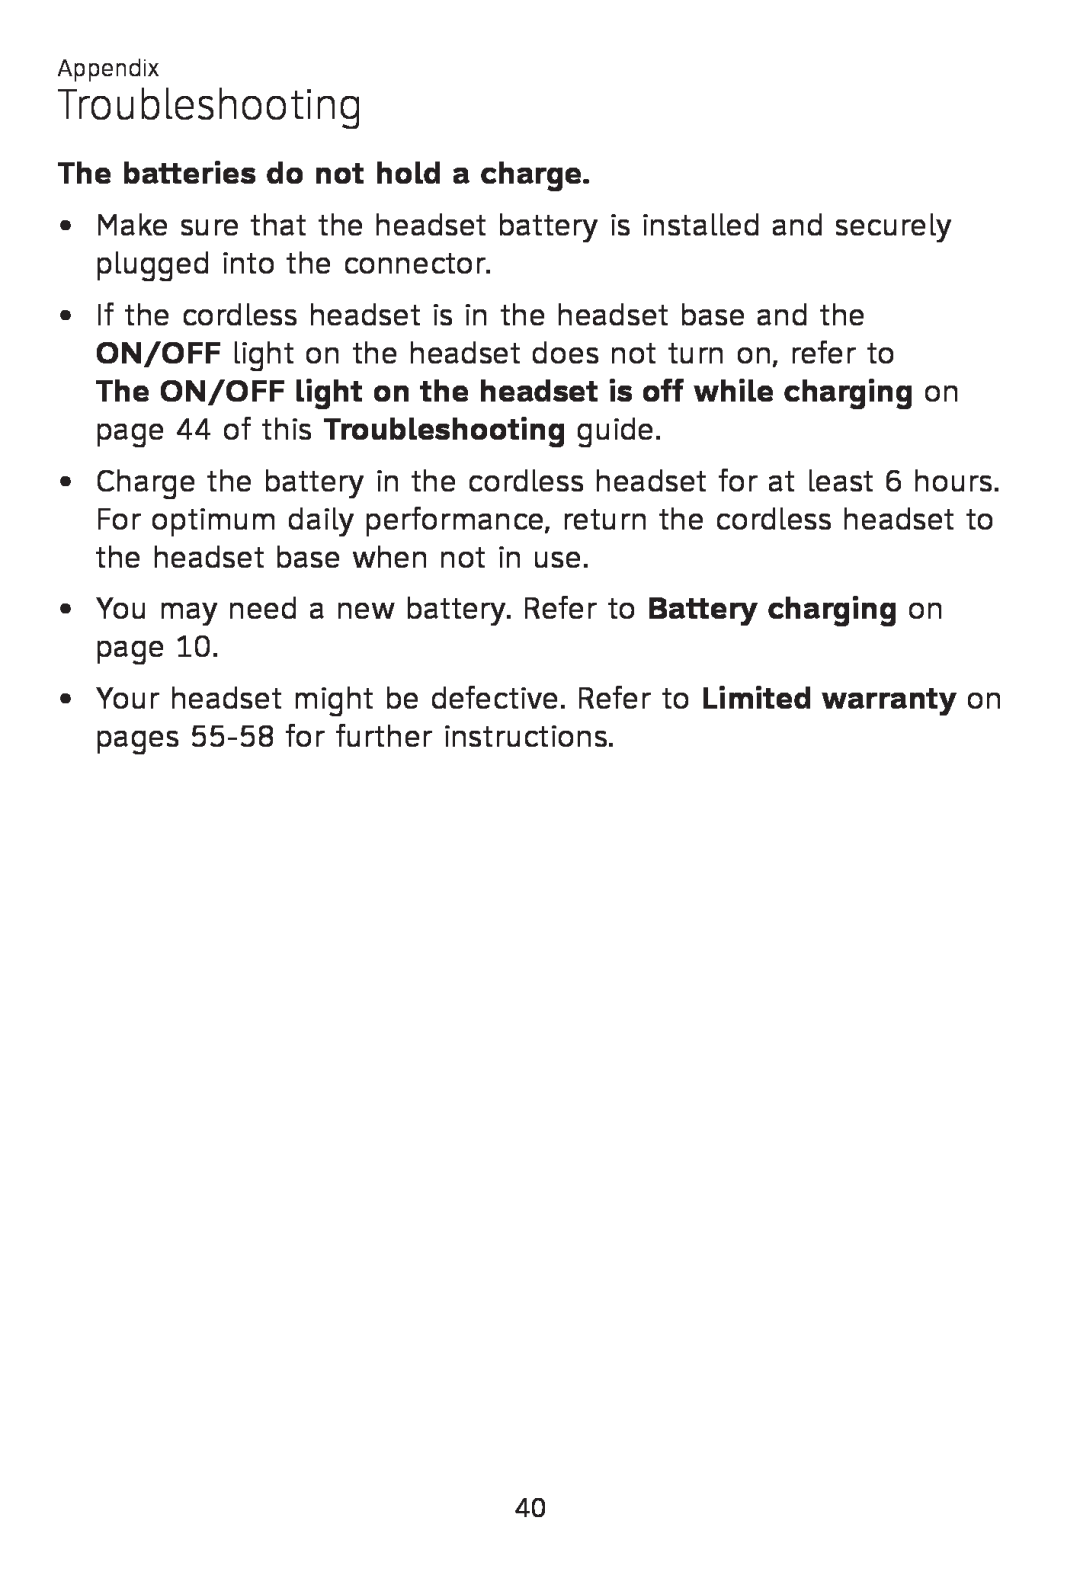 AT&T TL 7610 user manual The batteries do not hold a charge, Troubleshooting 